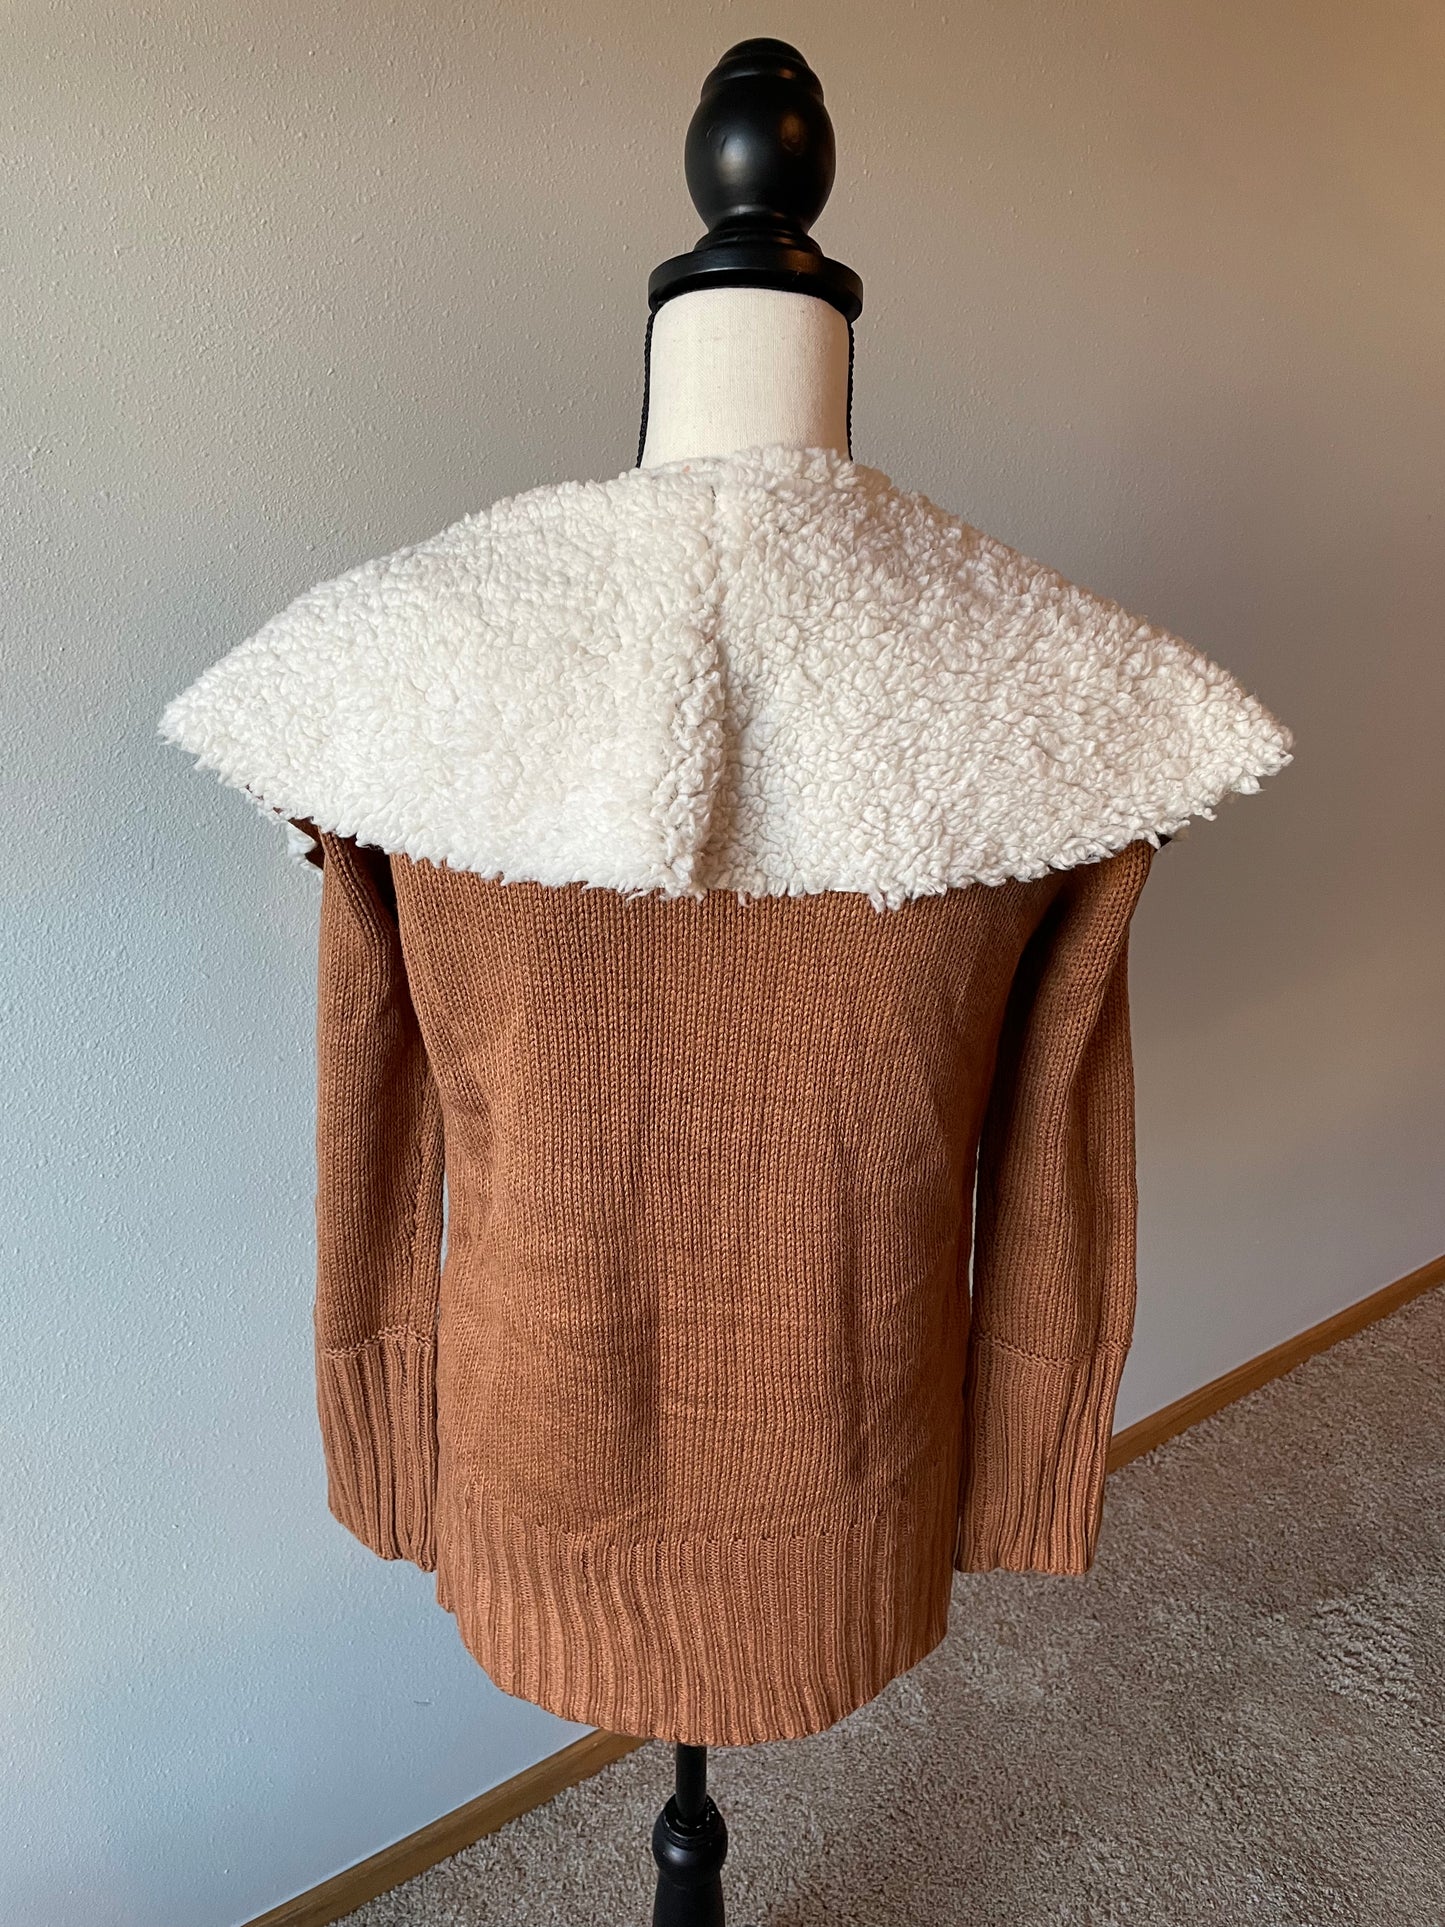 Alison Andrews Faux Suede Sweater Jacket (S)